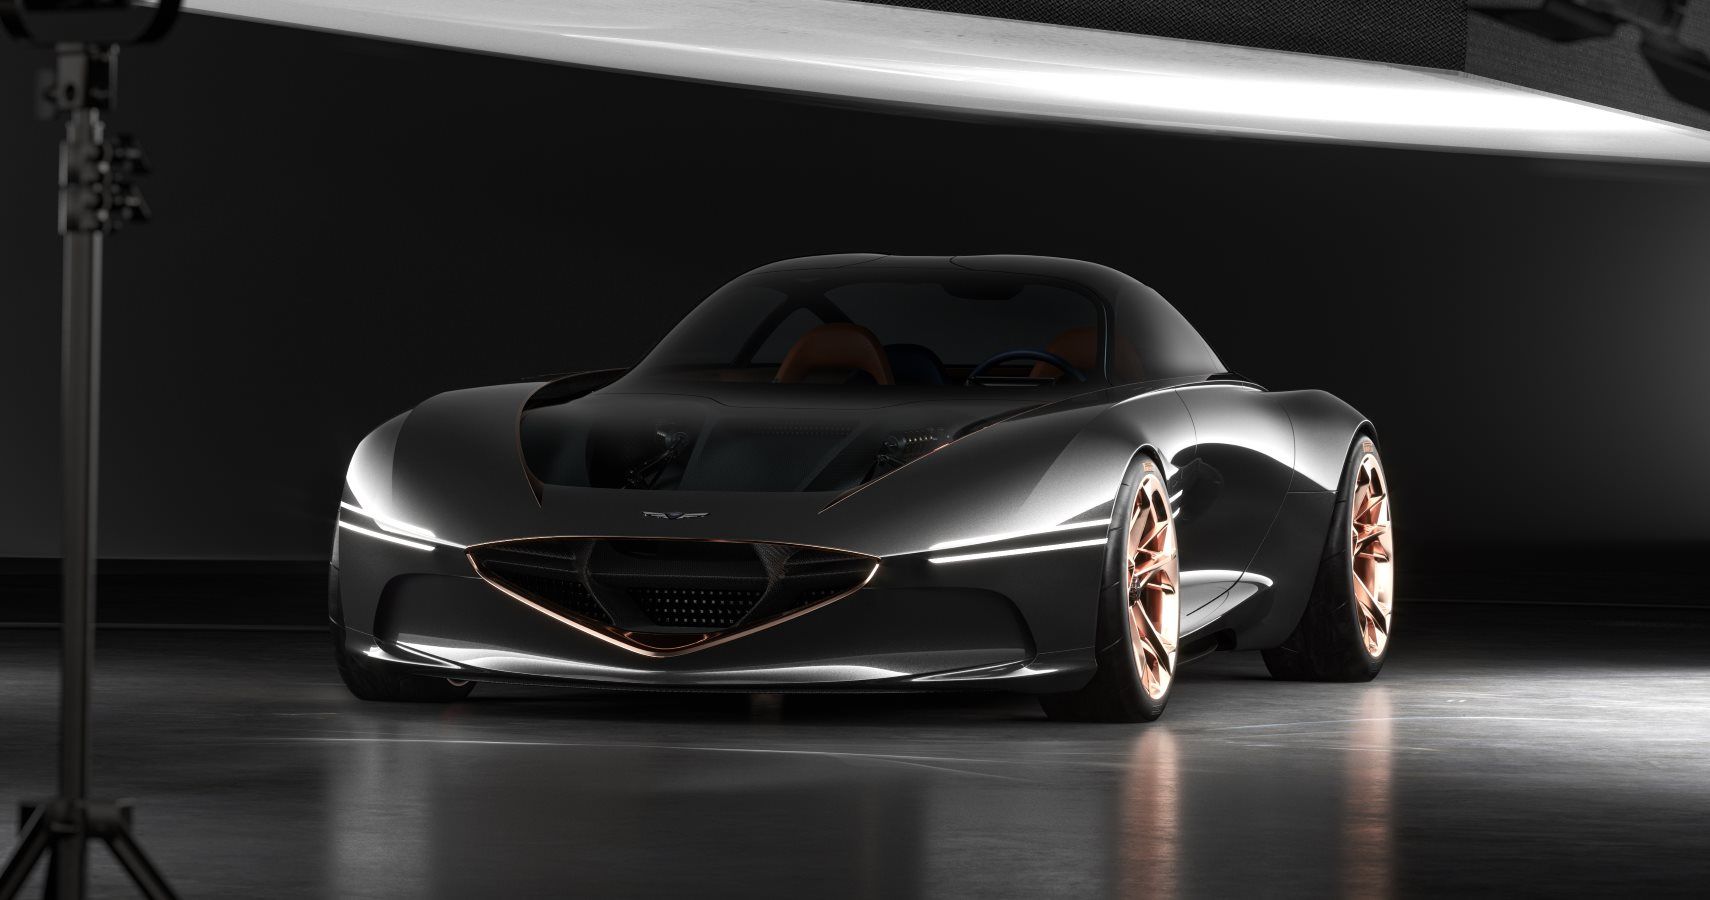 New York Auto Show: Everyone's Talking About The Genesis Essentia Concept